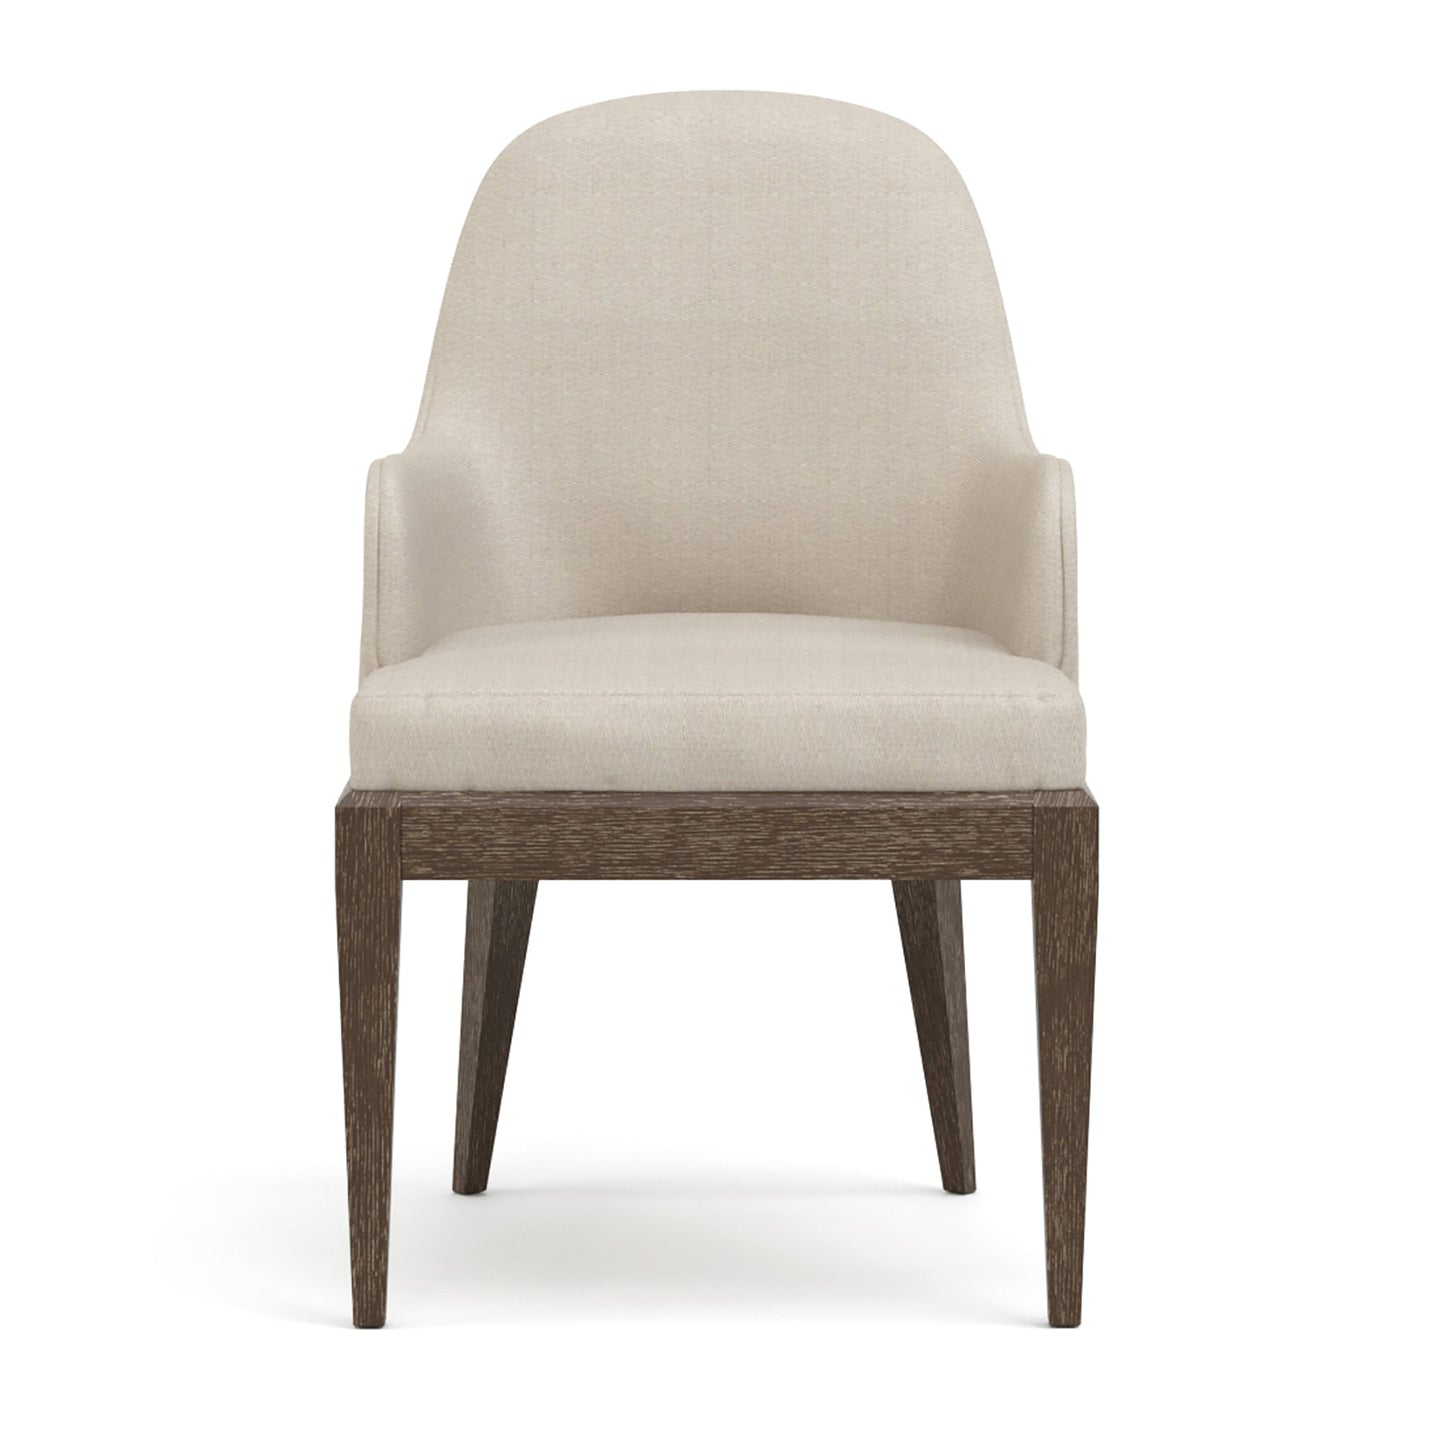 Maidstone Upholstered Arm Chair in 202 Pier finish